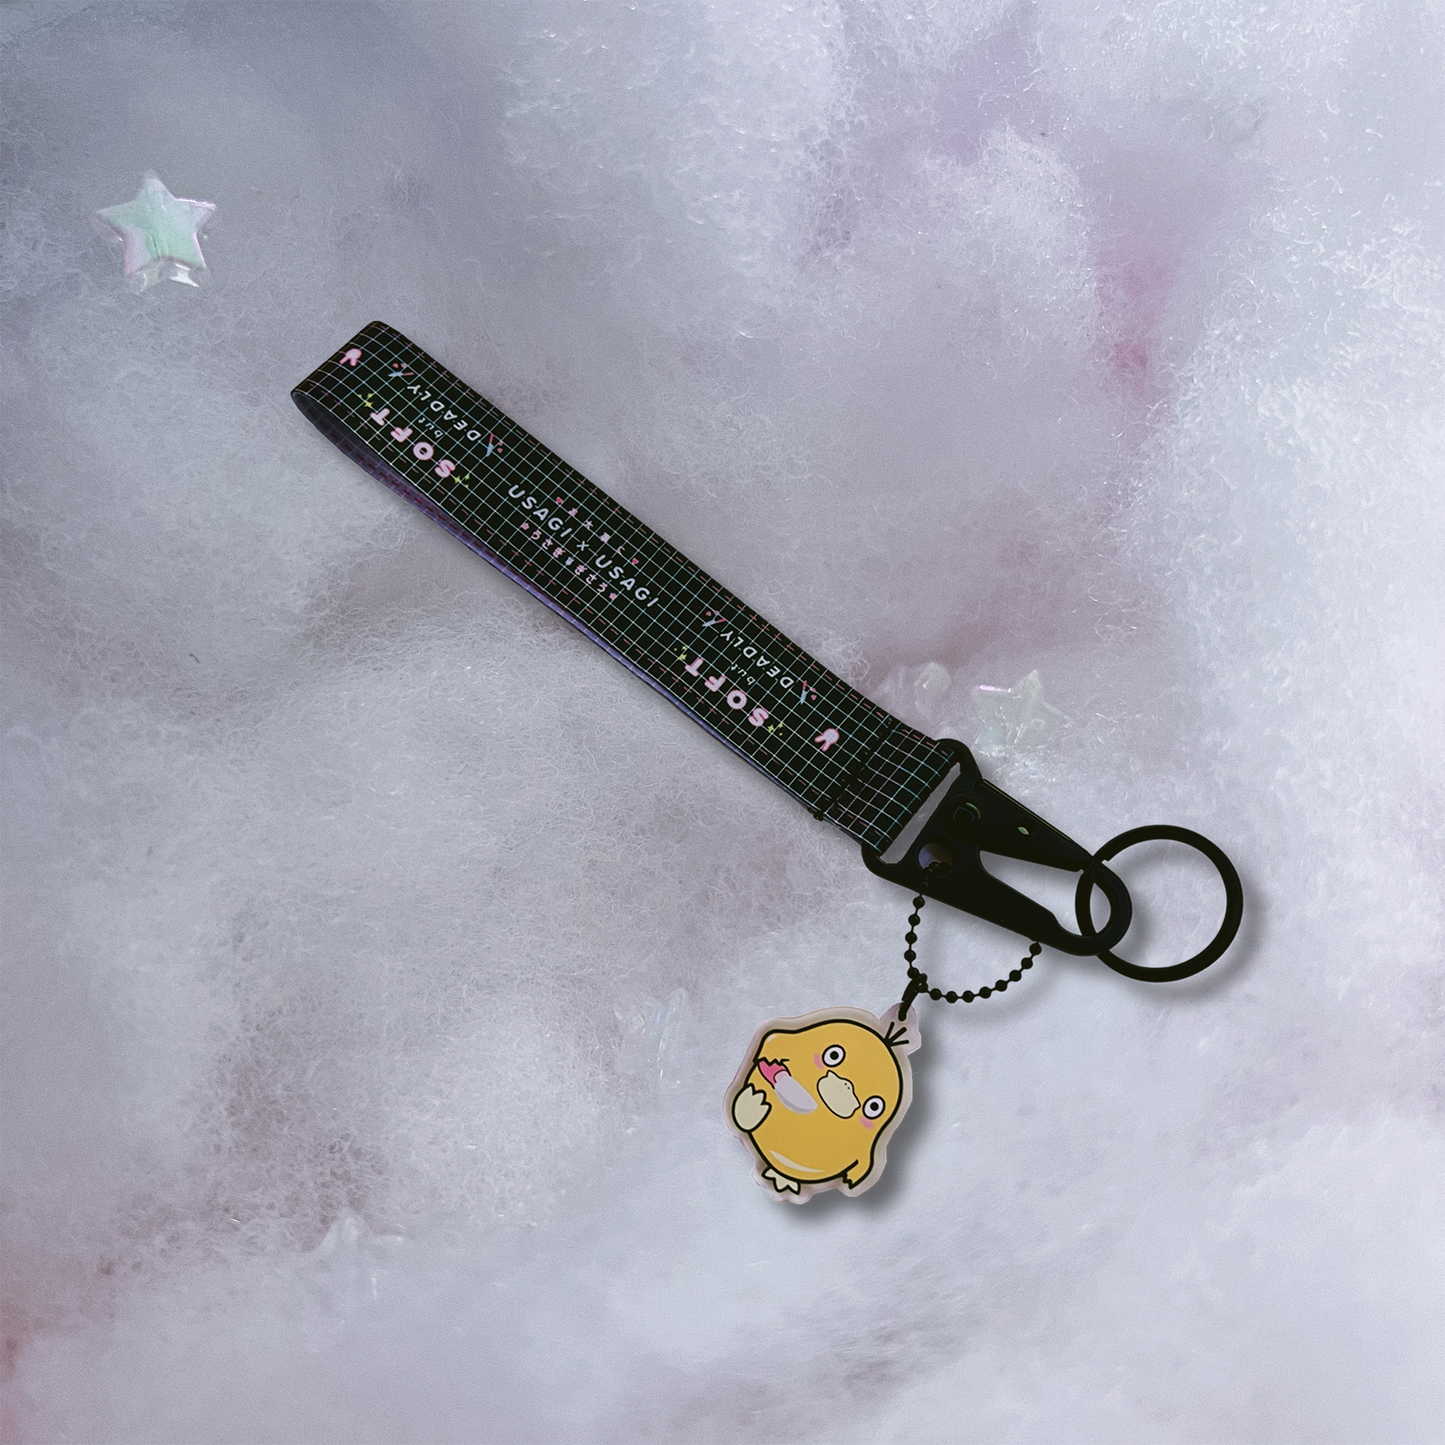 Duck with Knife Key Strap includes black strap with "Soft but deadly," text and Usagi x Usagi logo. Attached is a acrylic charm of Psyduck with Knife.